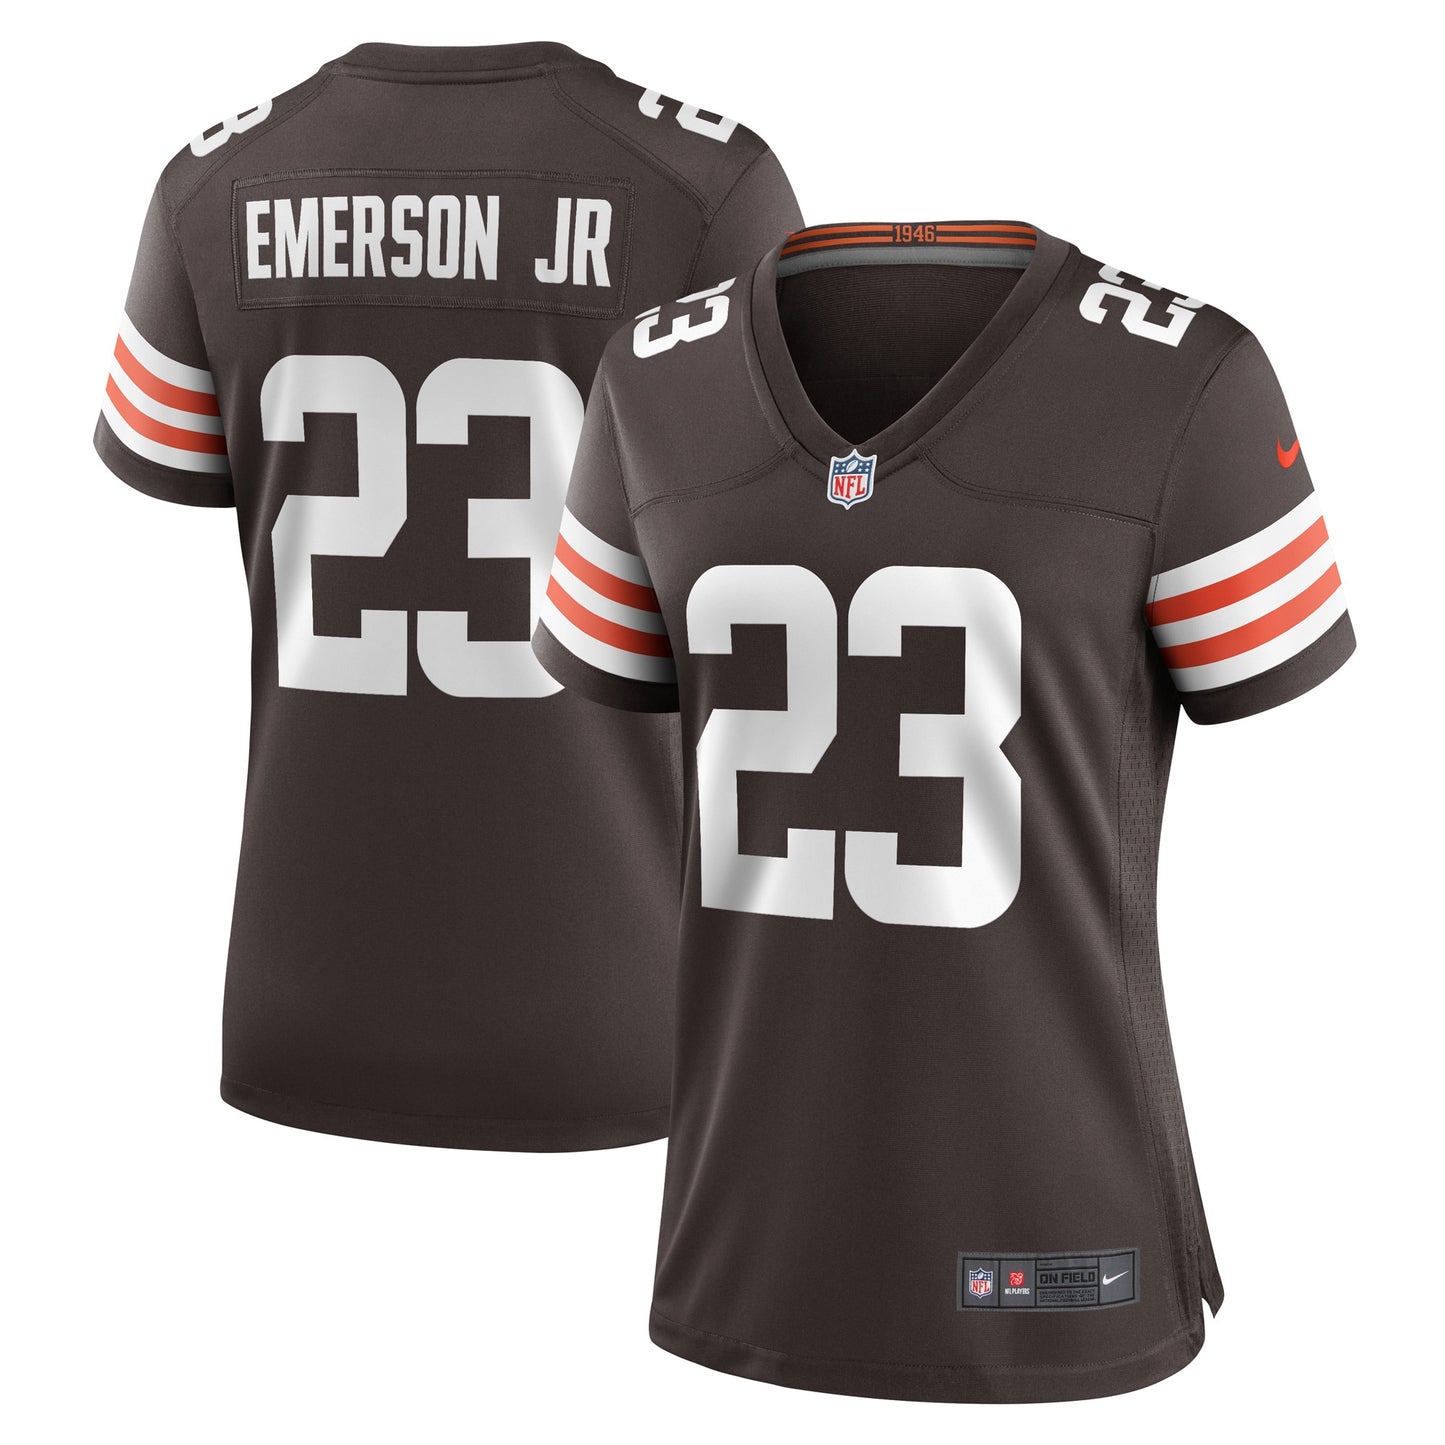 Martin Emerson Jr. Cleveland Browns Nike Women's Game Player Jersey - Brown